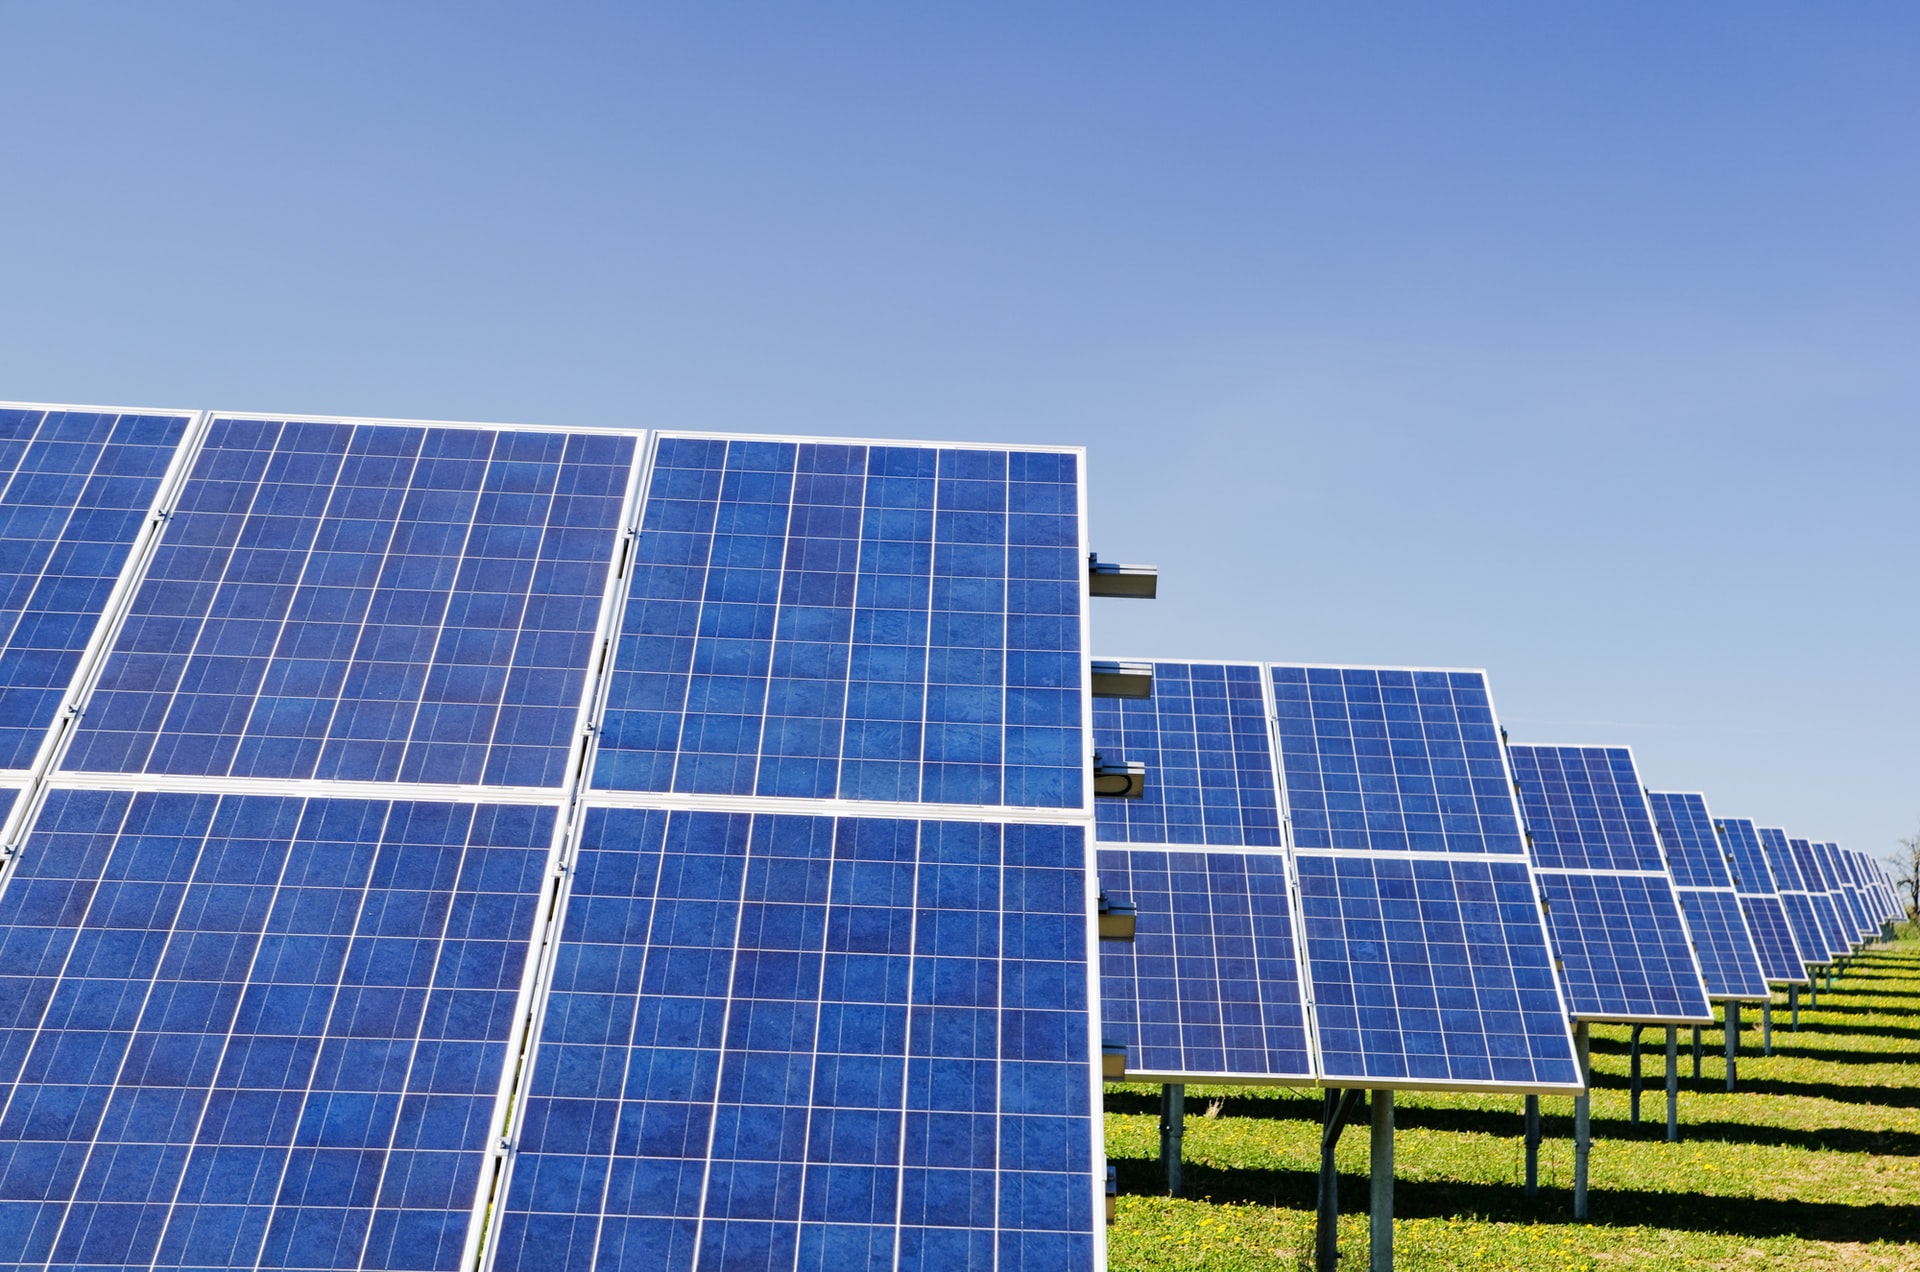 Blue solar panels positions in a field on a clear blue sky day